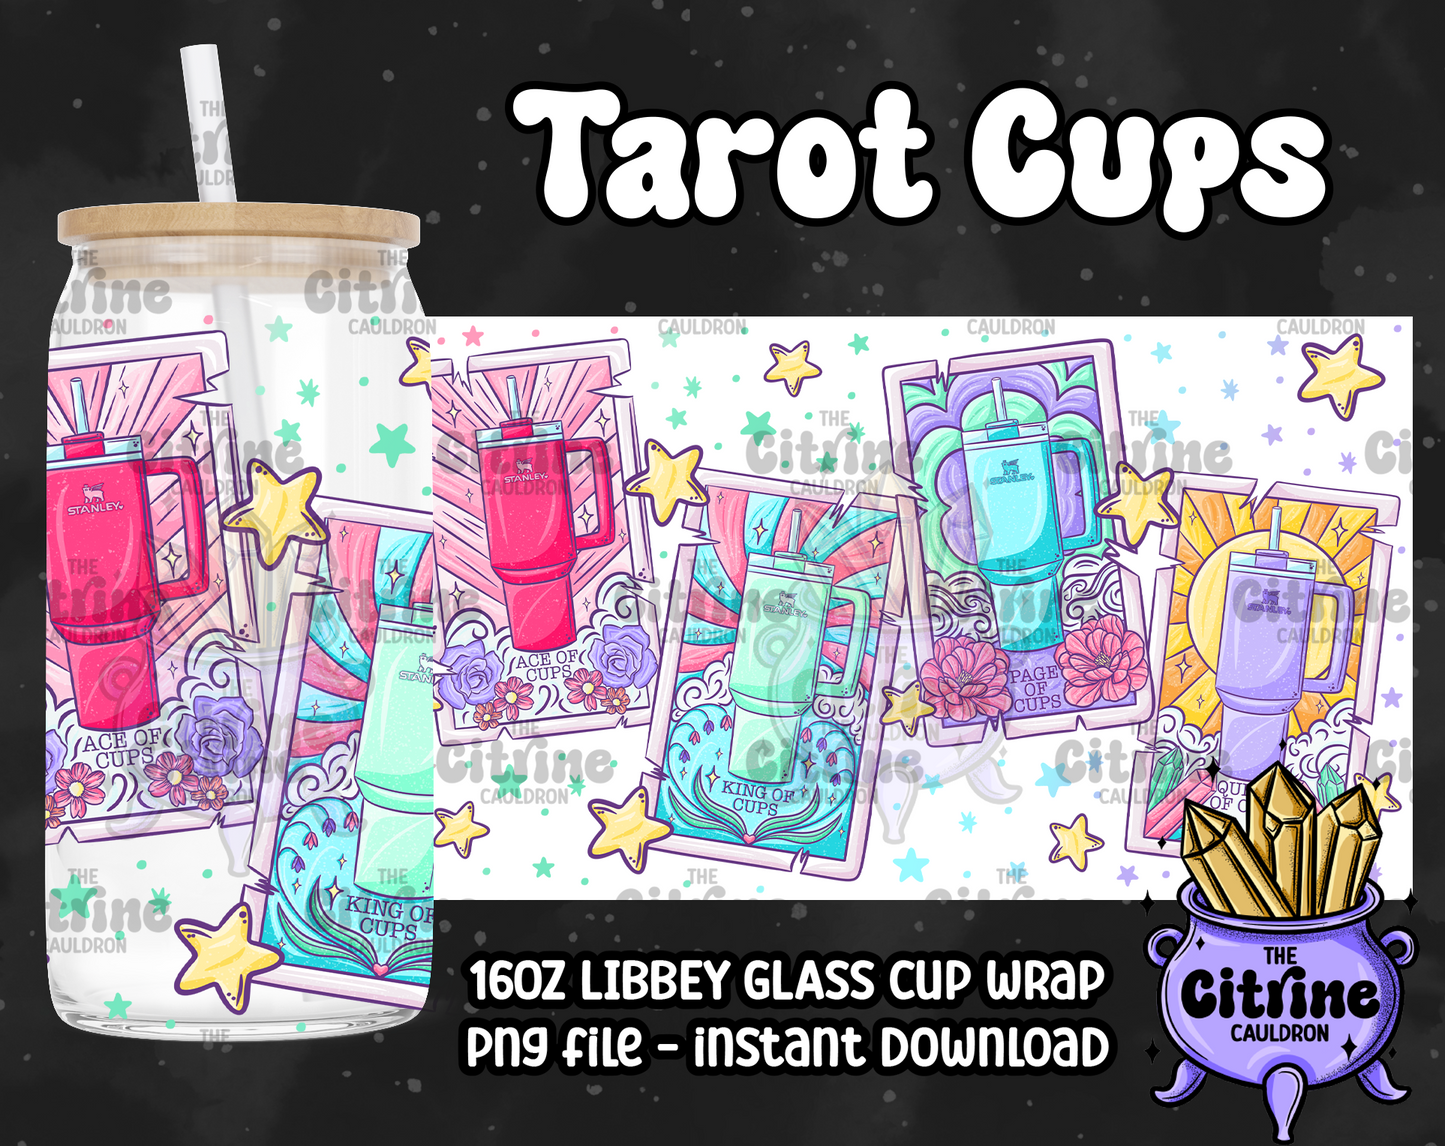 Tarot Cups - PNG Wrap for Libbey 16oz Glass Can